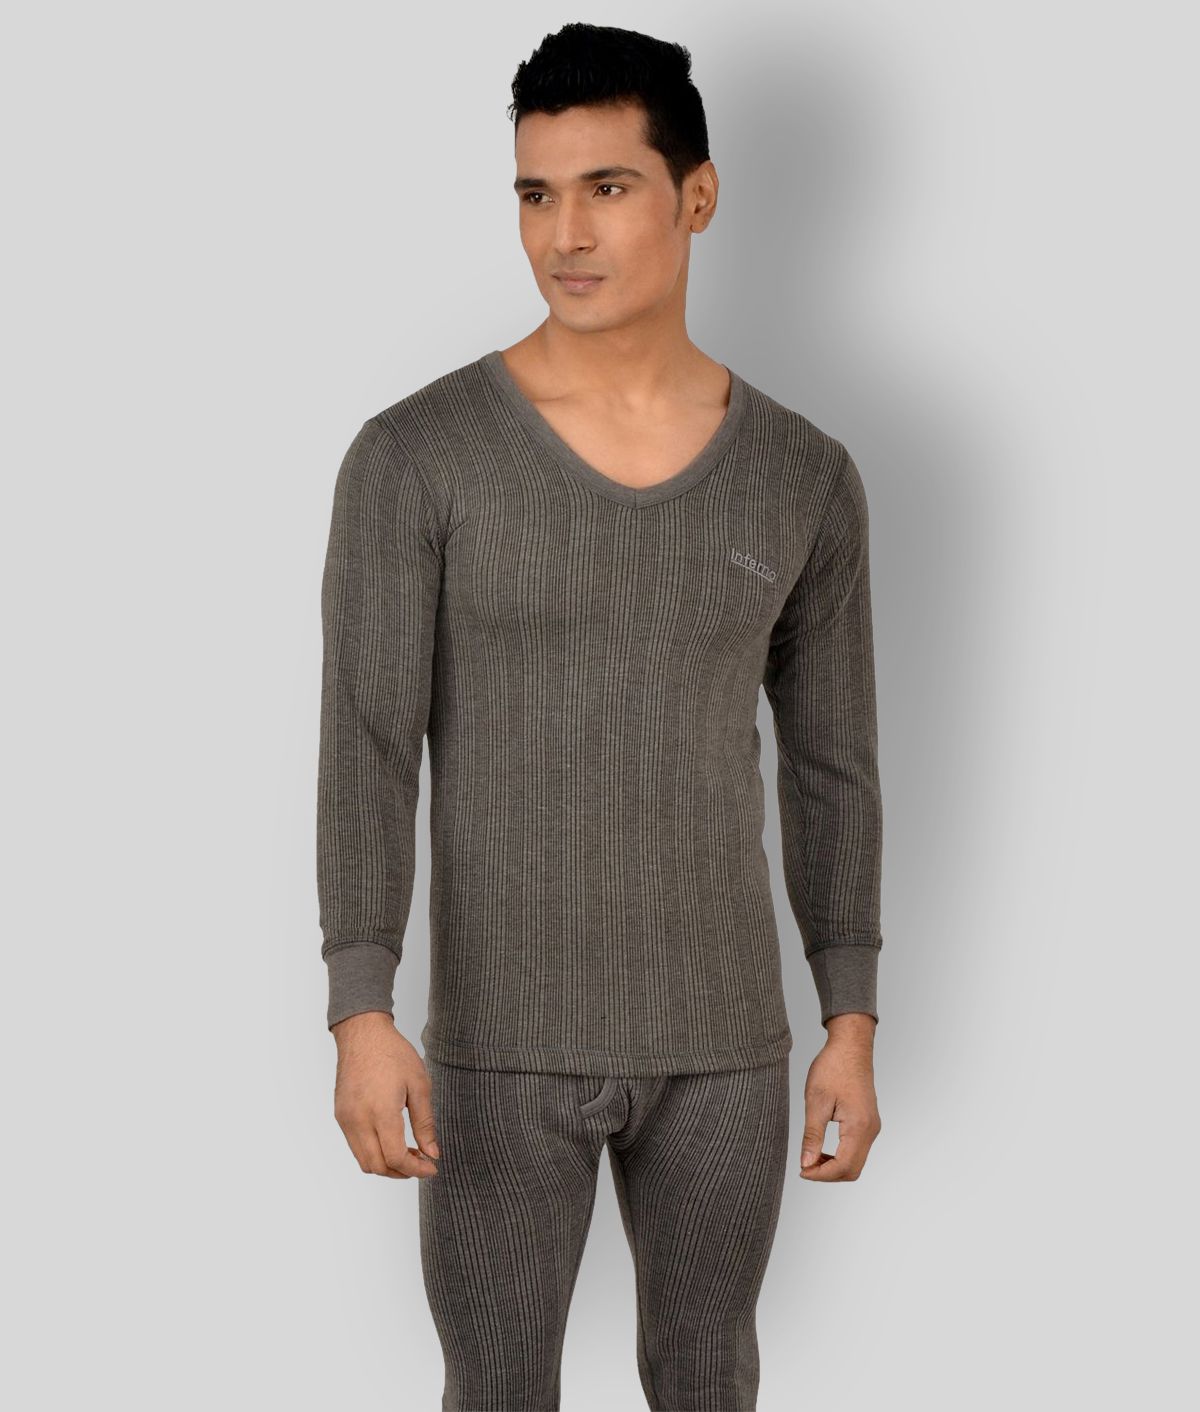     			Lux Inferno - Charcoal Cotton Blend Men's Thermal Tops ( Pack of 1 )